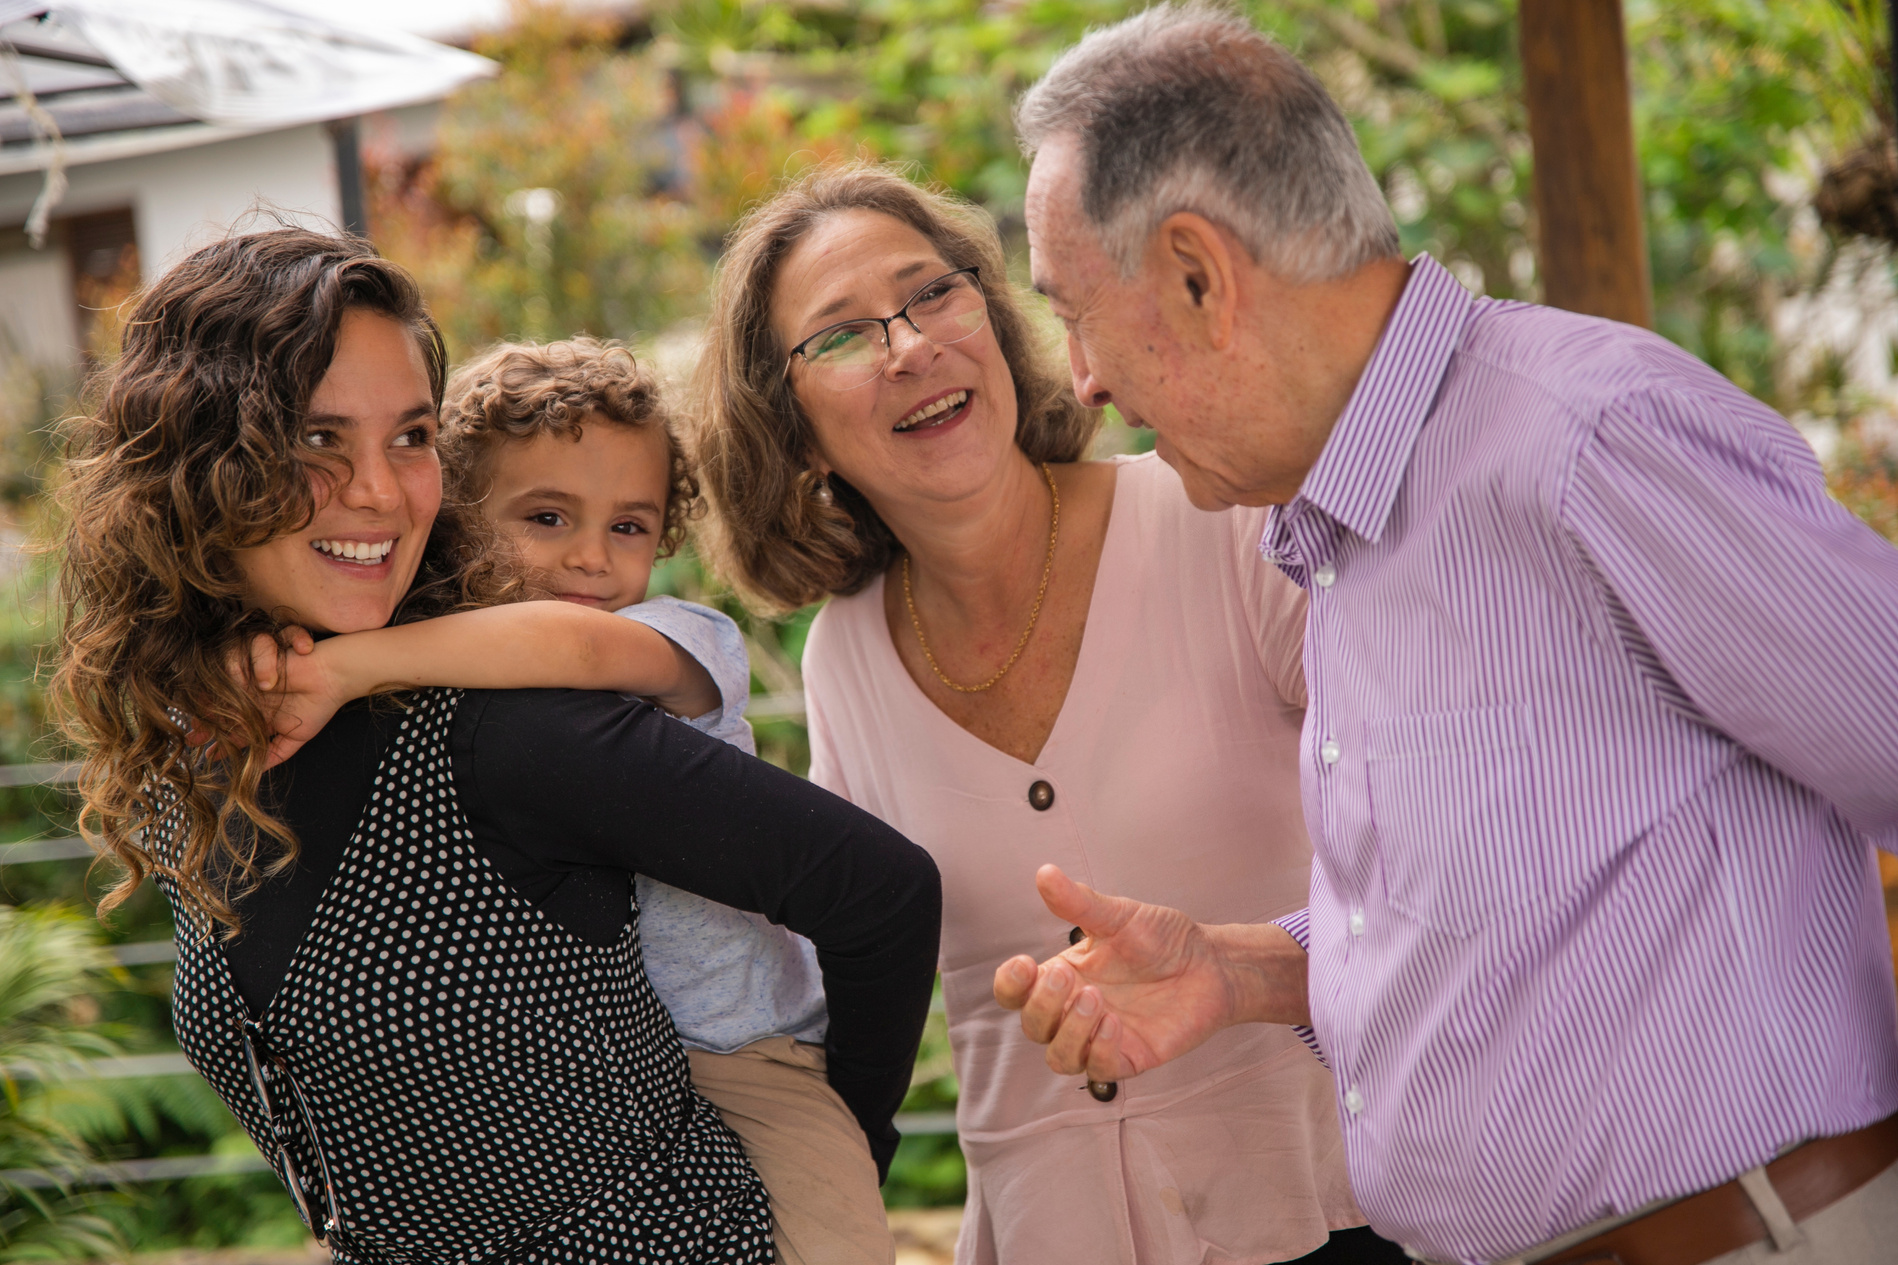 Multi-Generational Family Spending Time Together Outdoors